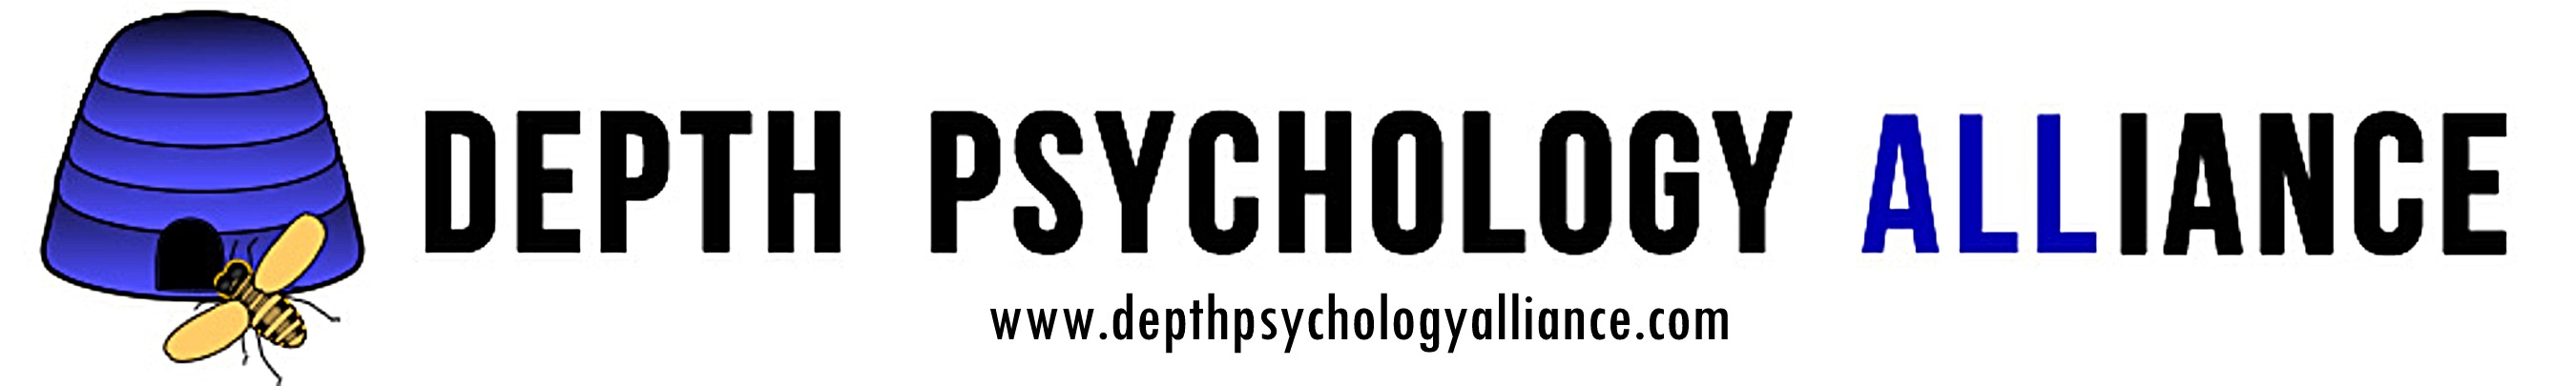 Depth Psychology Alliance - Engaging the World With Soul
